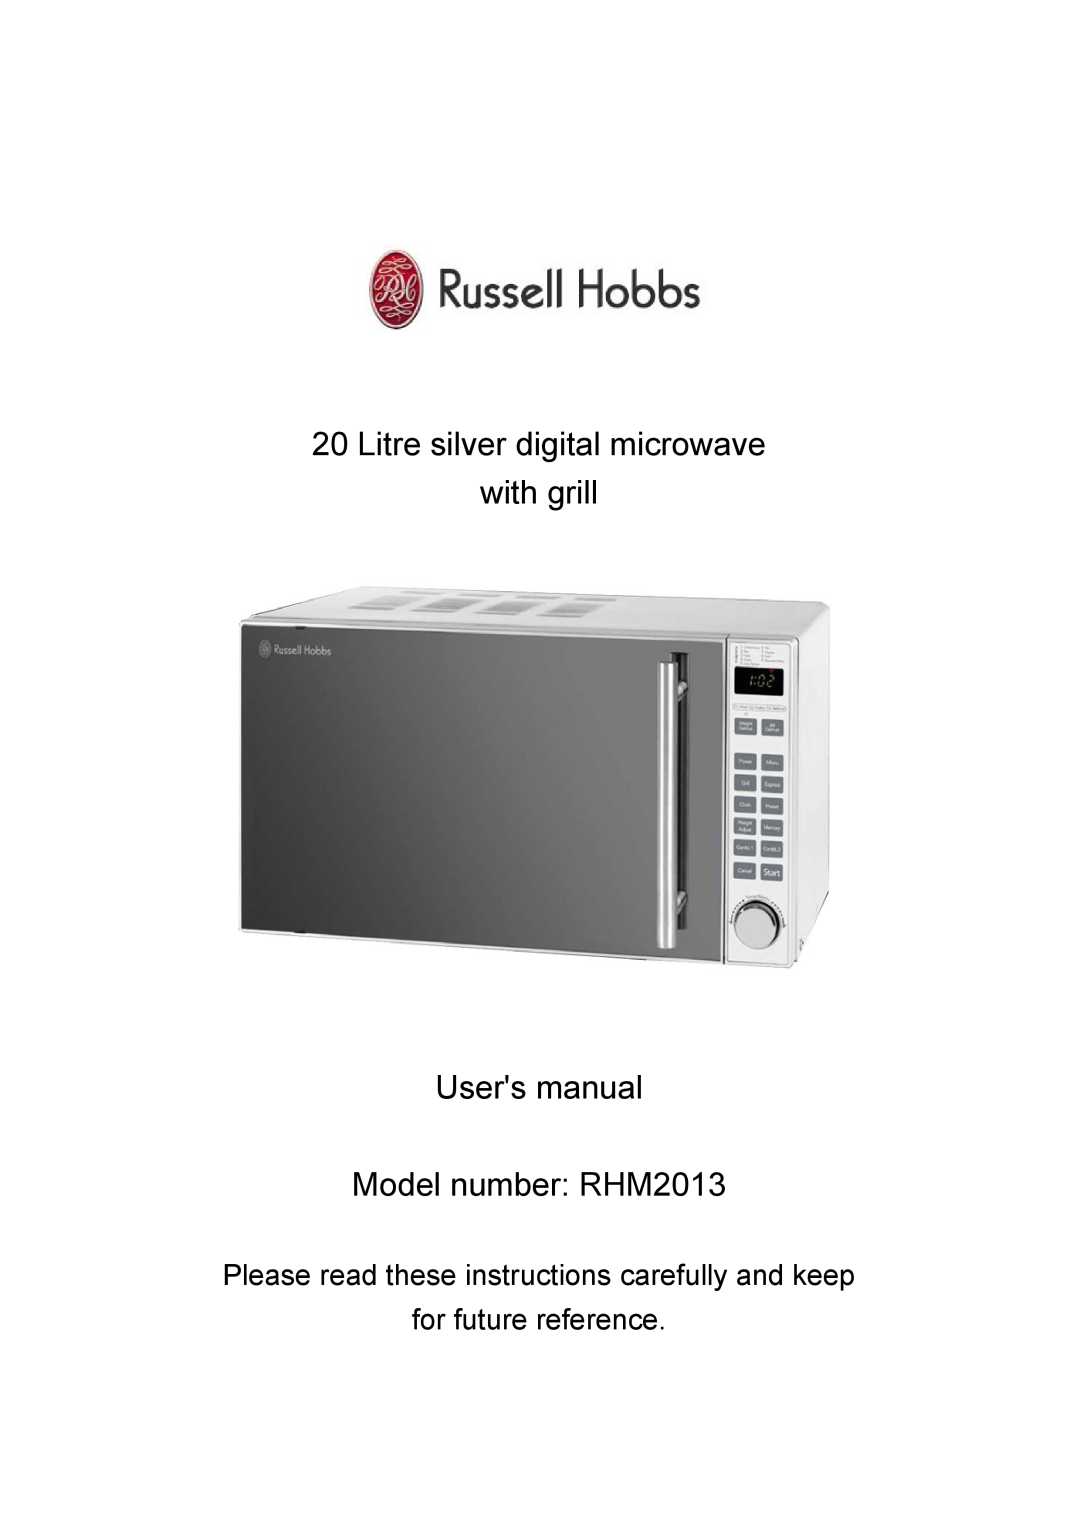 Russell Hobbs user manual Model number RHM2013, Please read these instructions carefully and keep, for future reference 